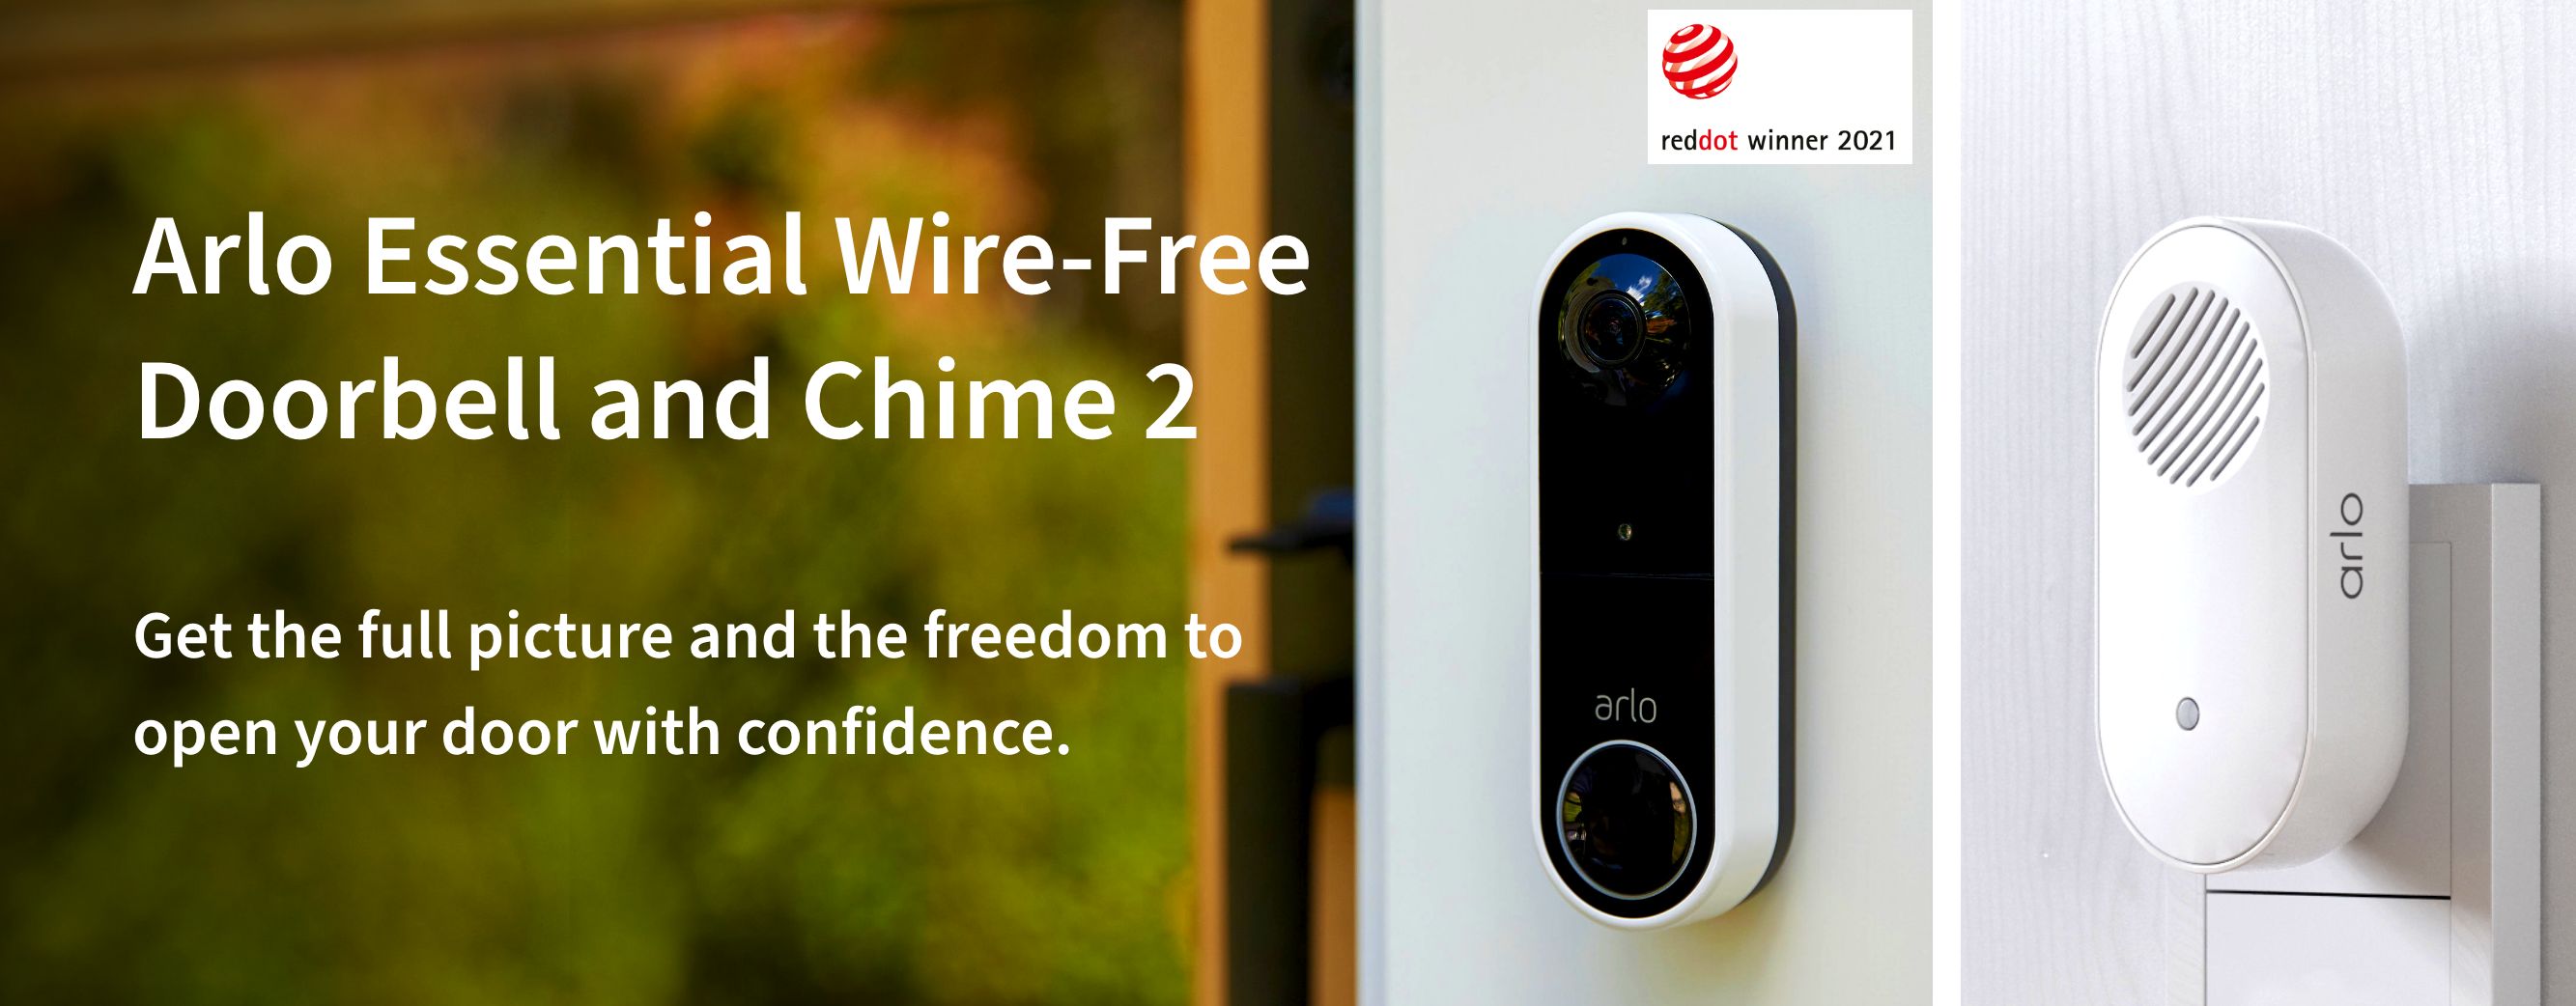 An Arlo  Essential Wire-free Doorbell and chime 2  gives you the full picture view -  Reddot winner 2021